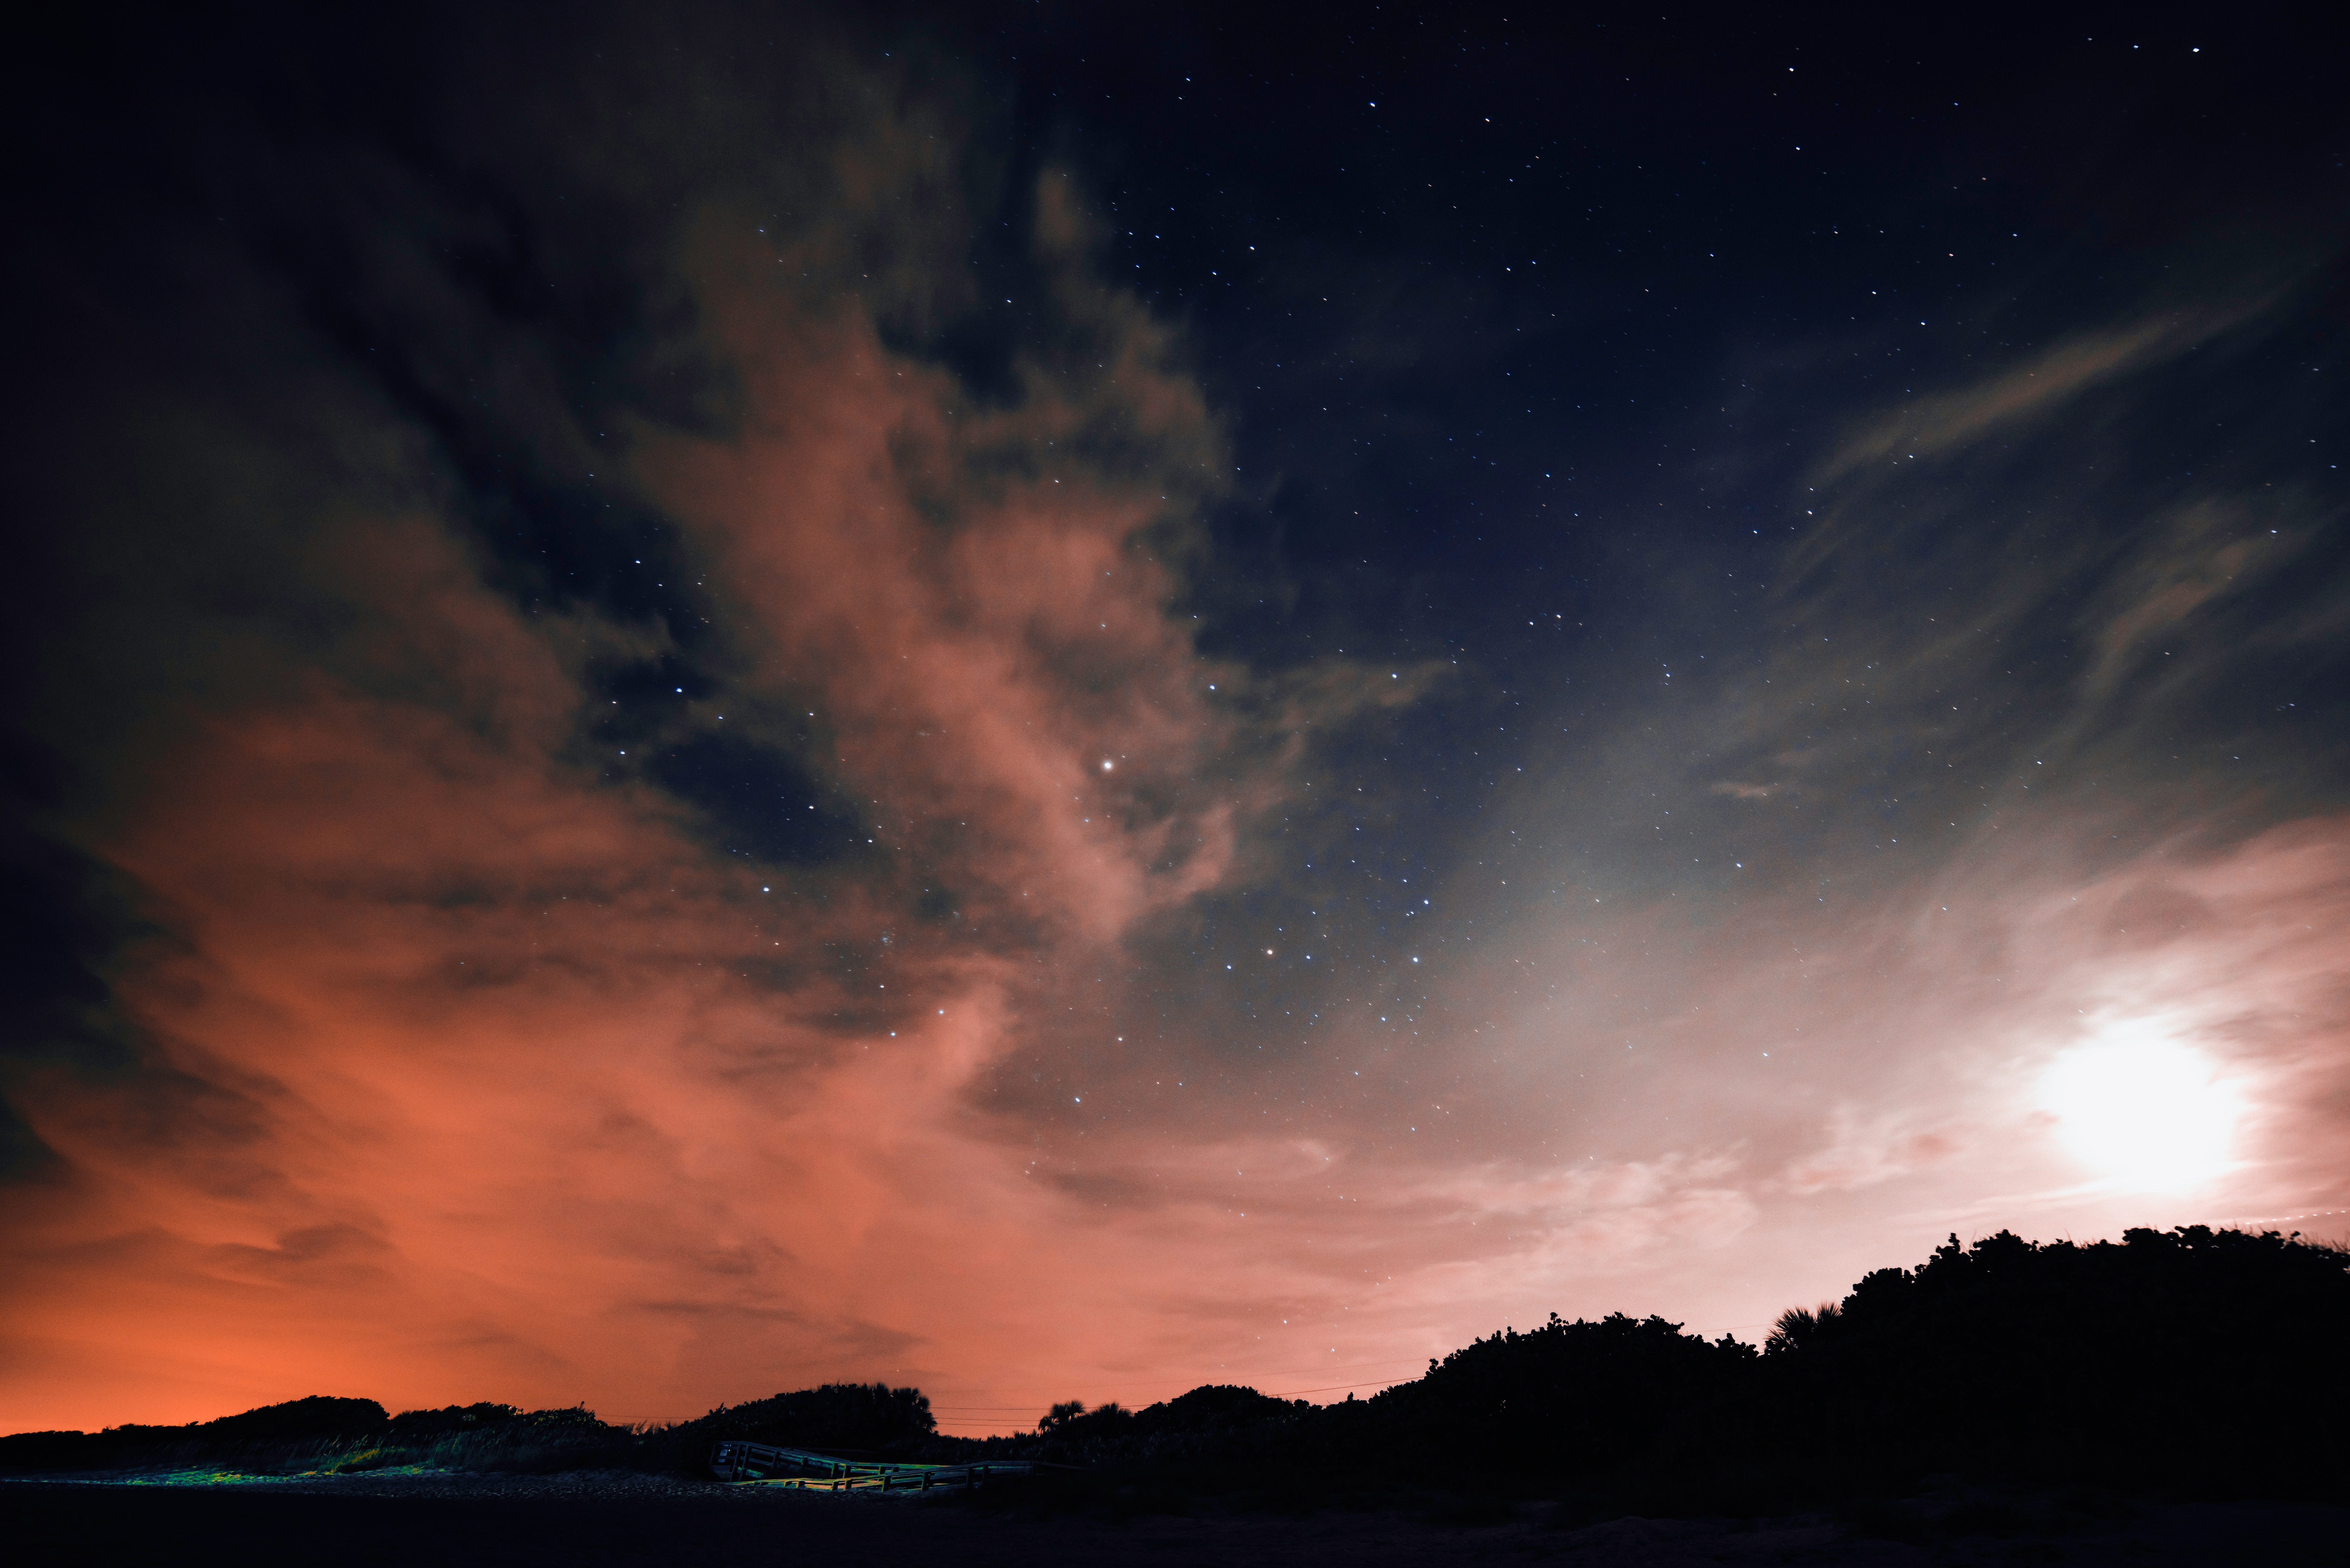 84904 download wallpaper nature, sky, stars, night, clouds screensavers and pictures for free